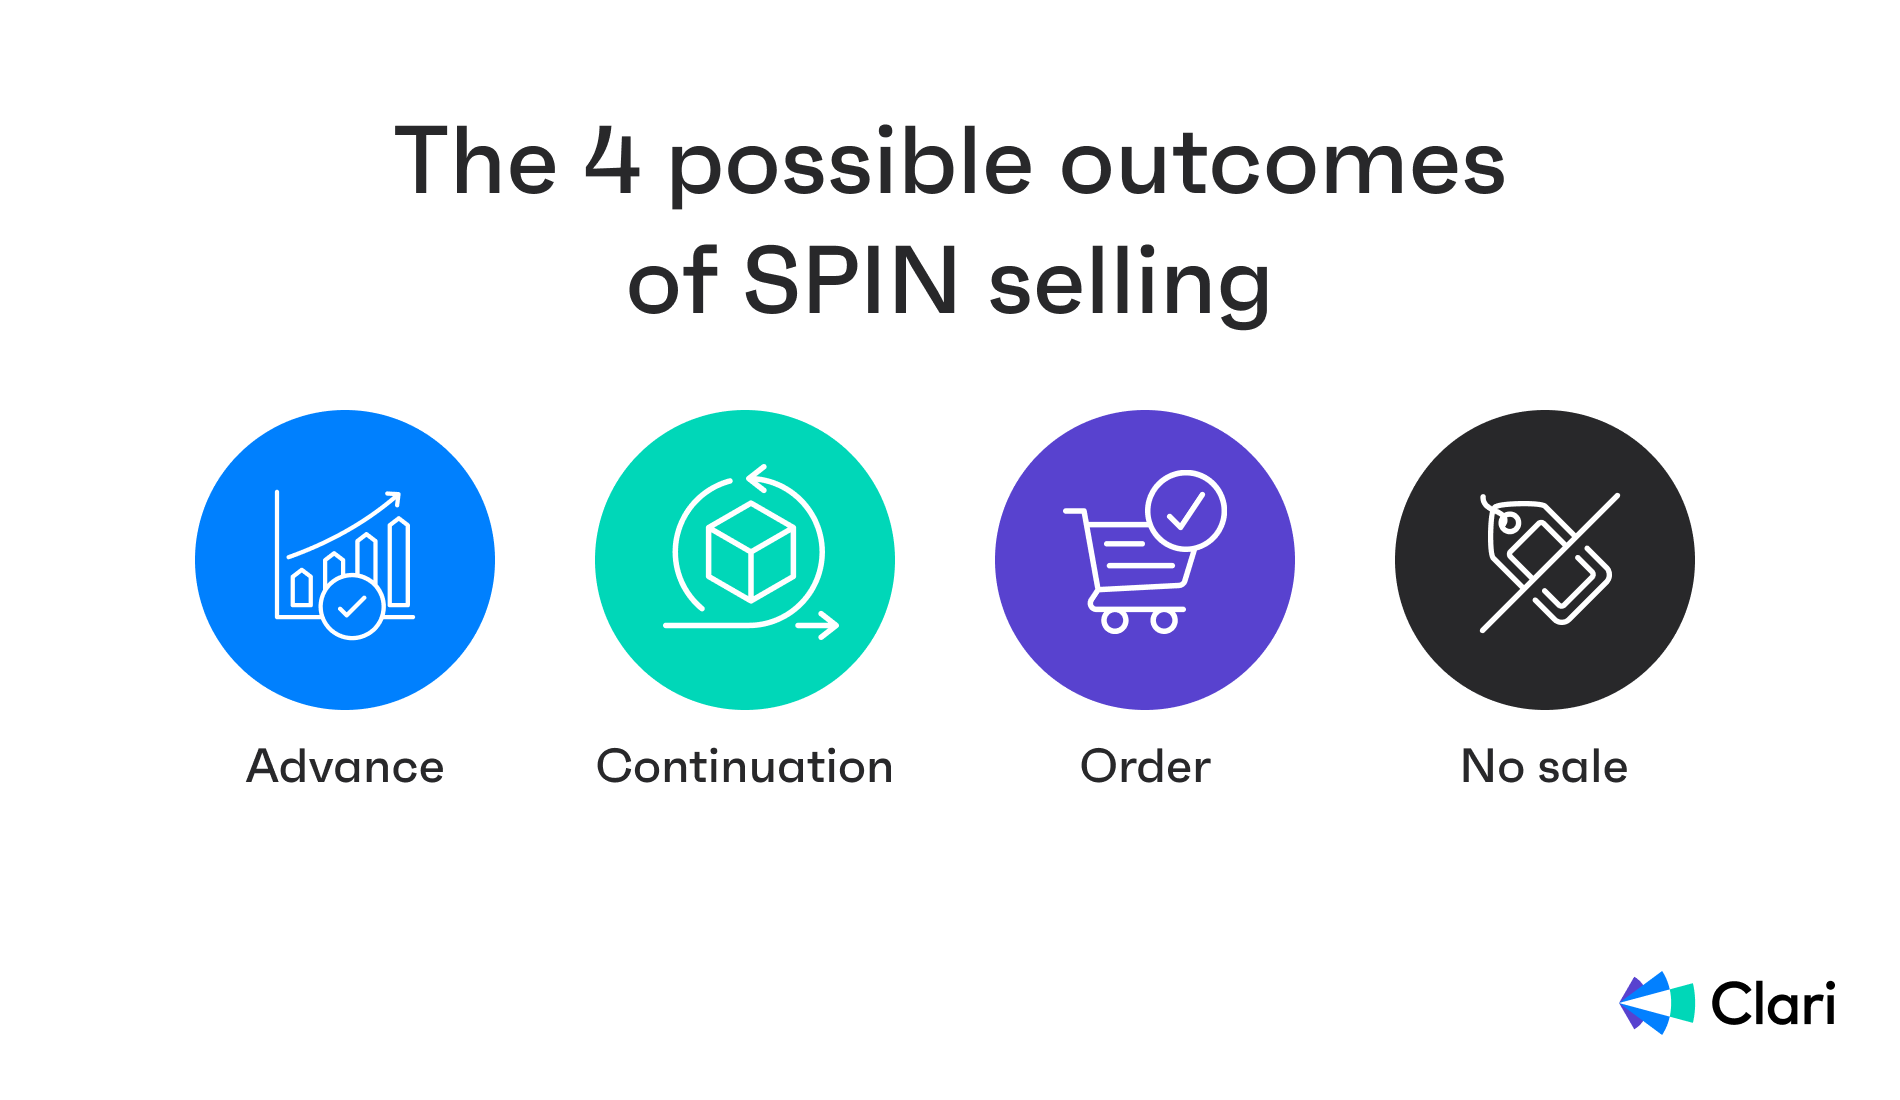 The 4 possible outcomes of SPIN selling